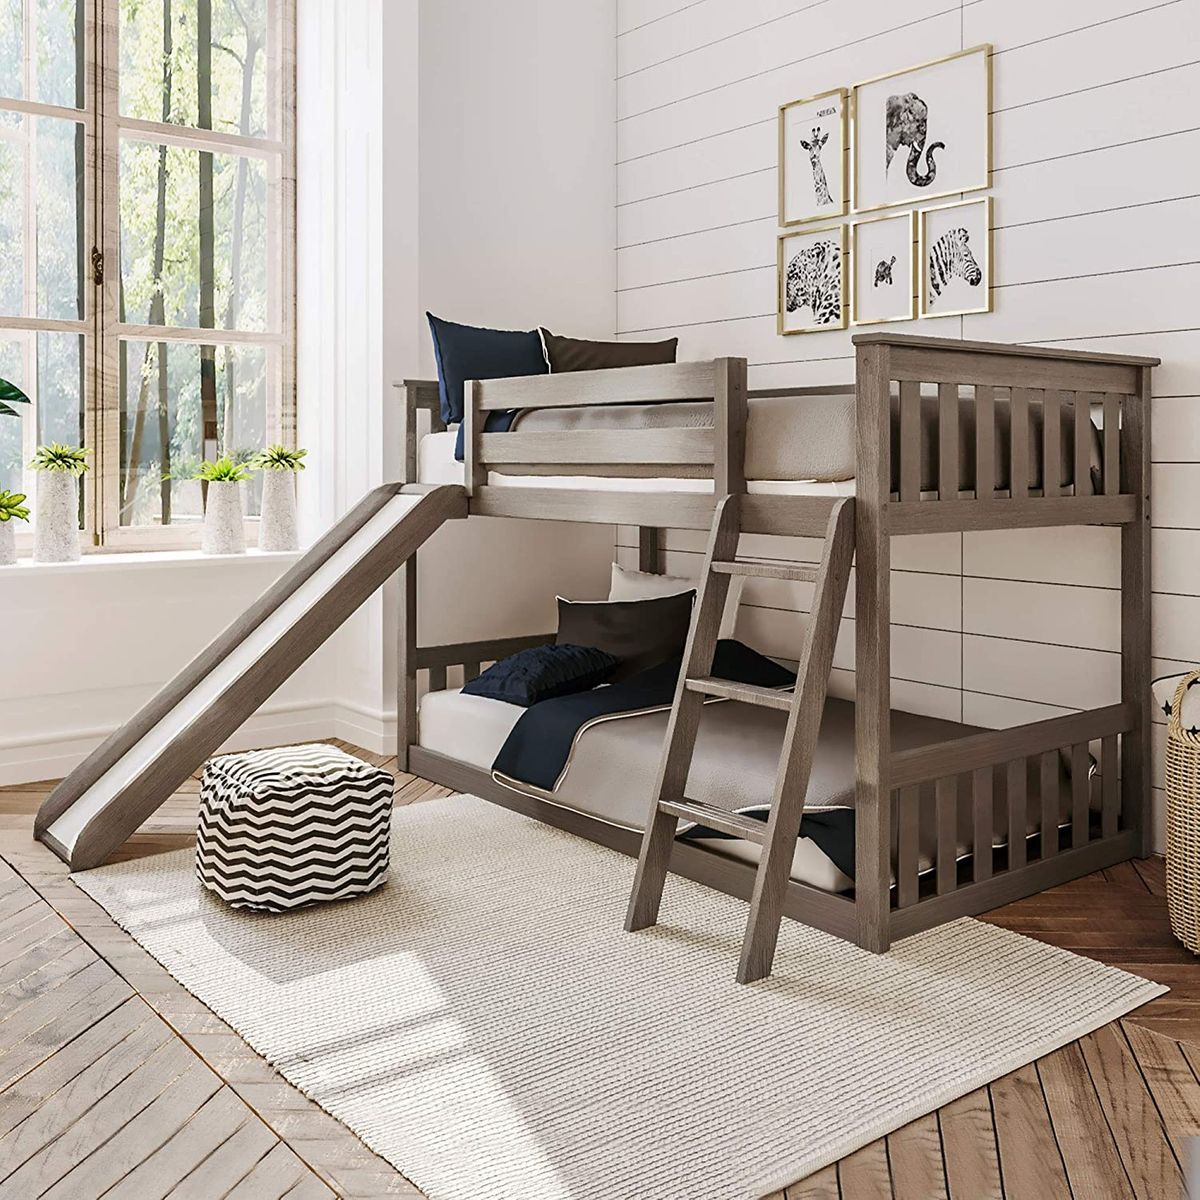 8 Best Bunk Beds 2020 The Strategist, Twin Beds Convert To Bunk